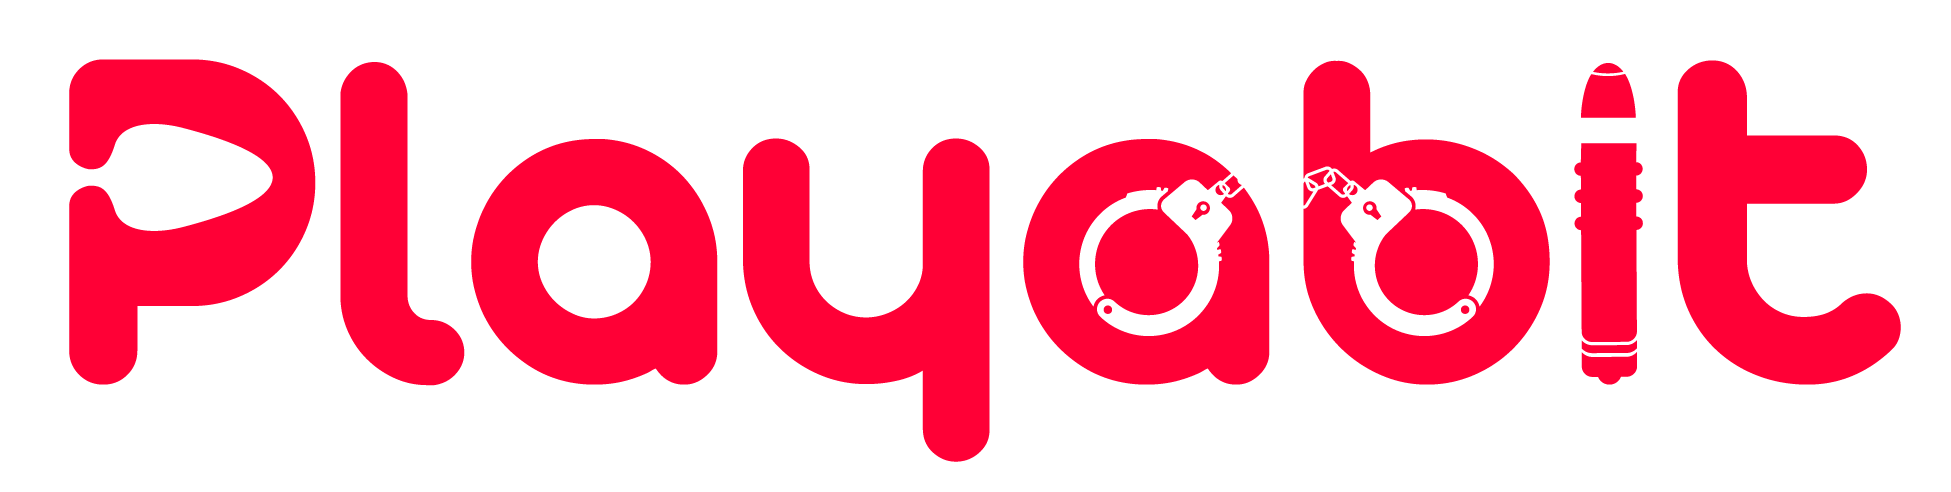 94-logo-red-png.png